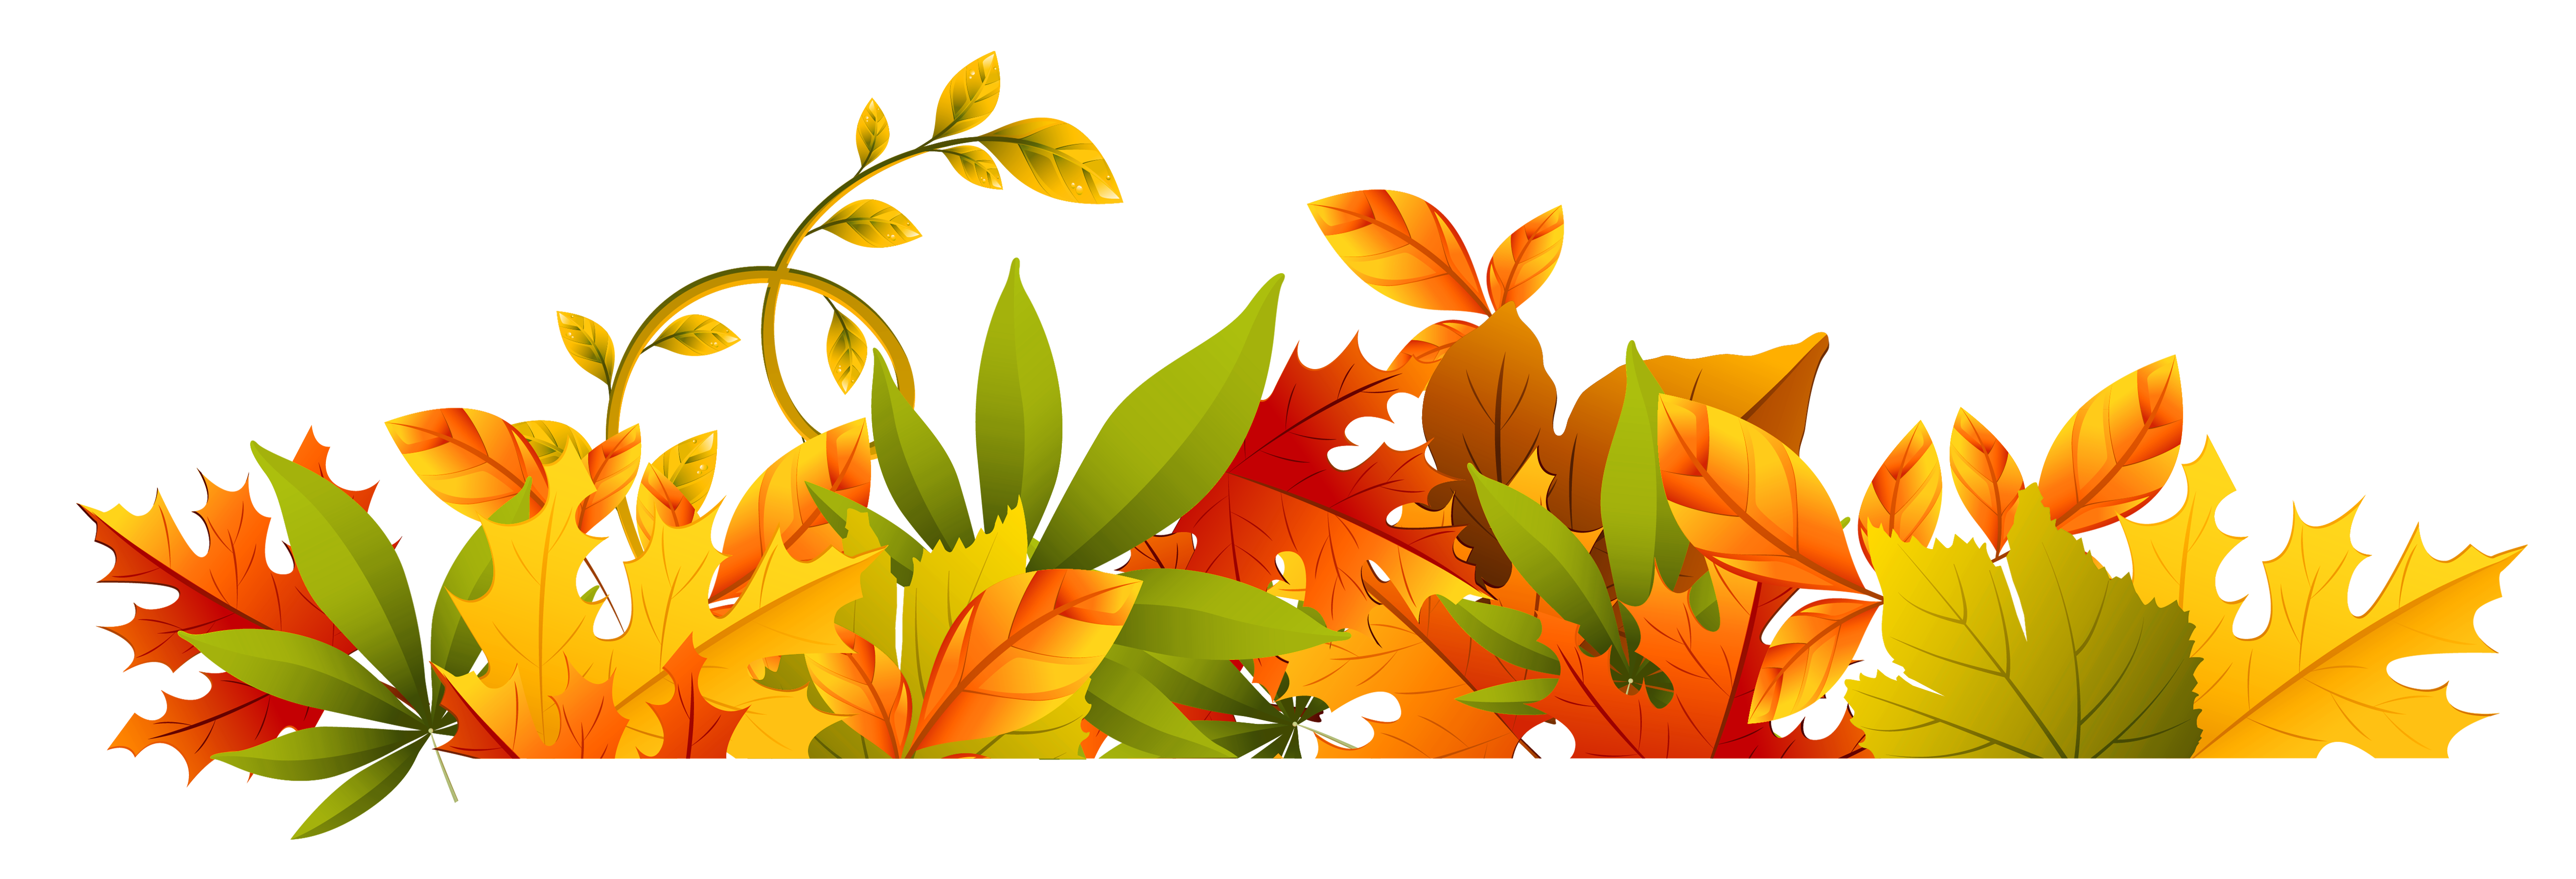 Transparent Autumn Border PNG Clipart​-Quality Image and Transparent PNG Free Clipart